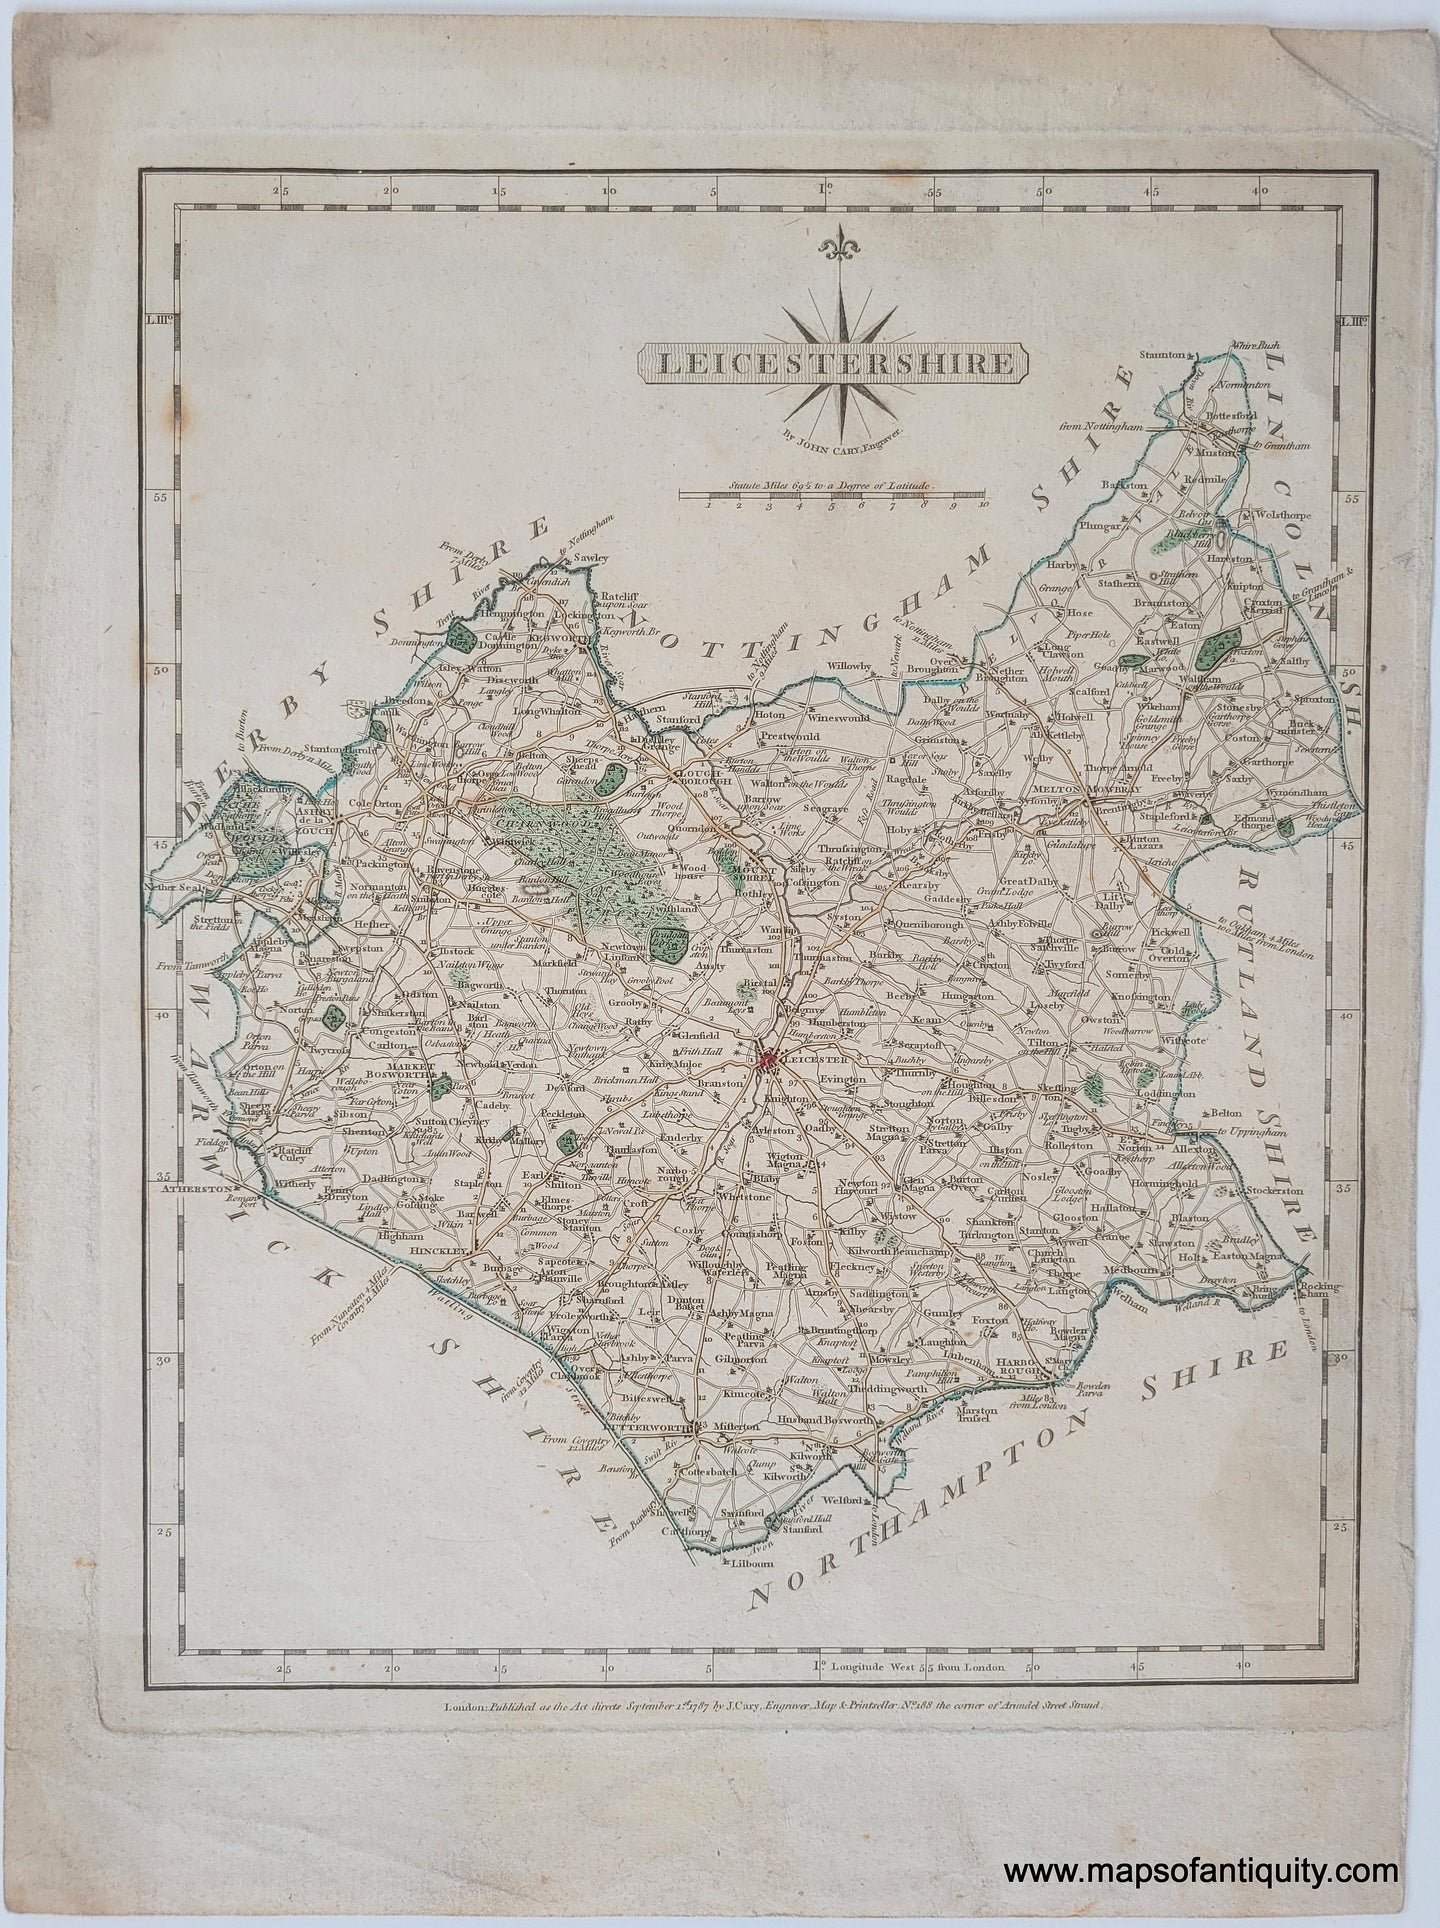 1787 - Leicestershire - Antique Map